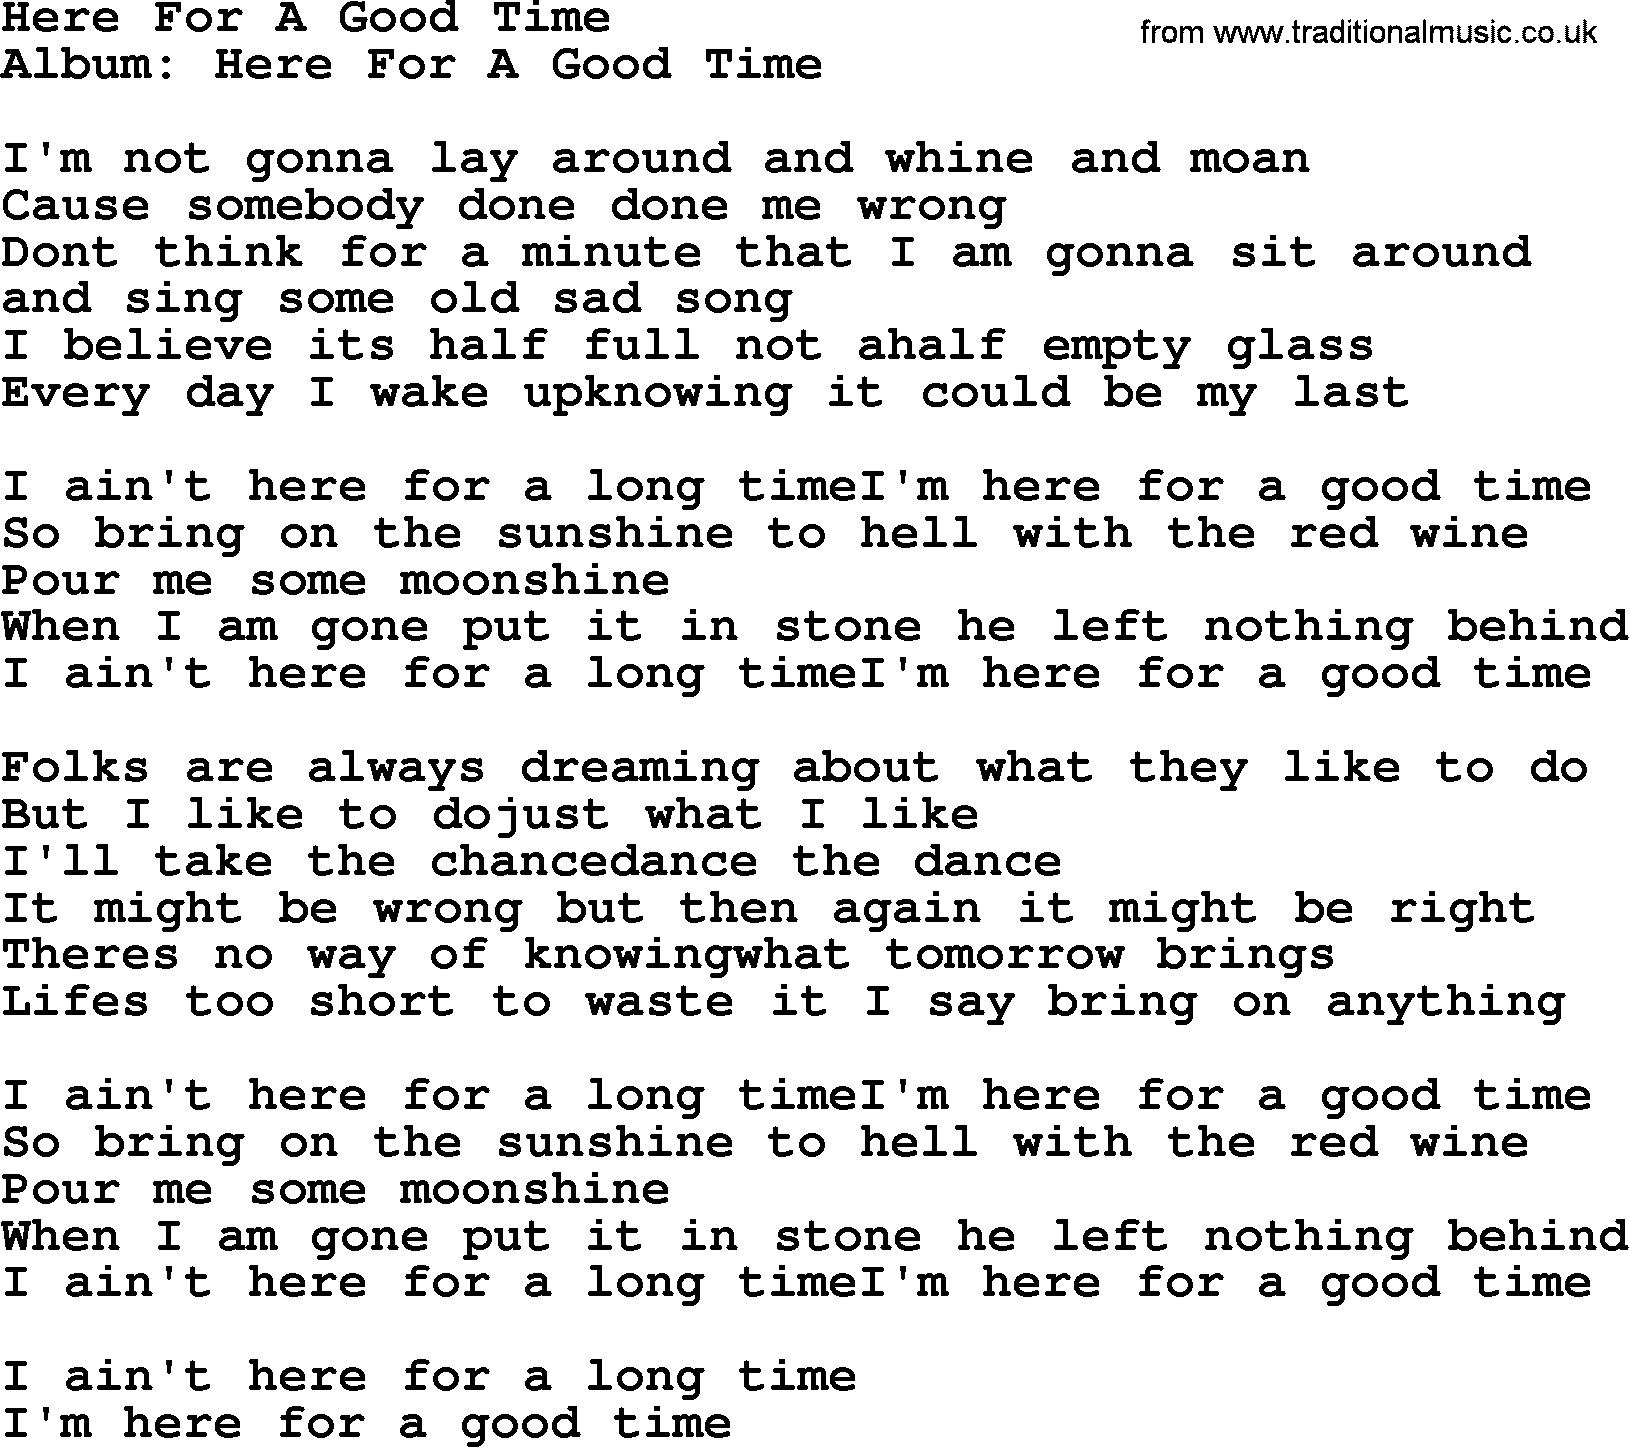 George Strait song: Here For A Good Time, lyrics